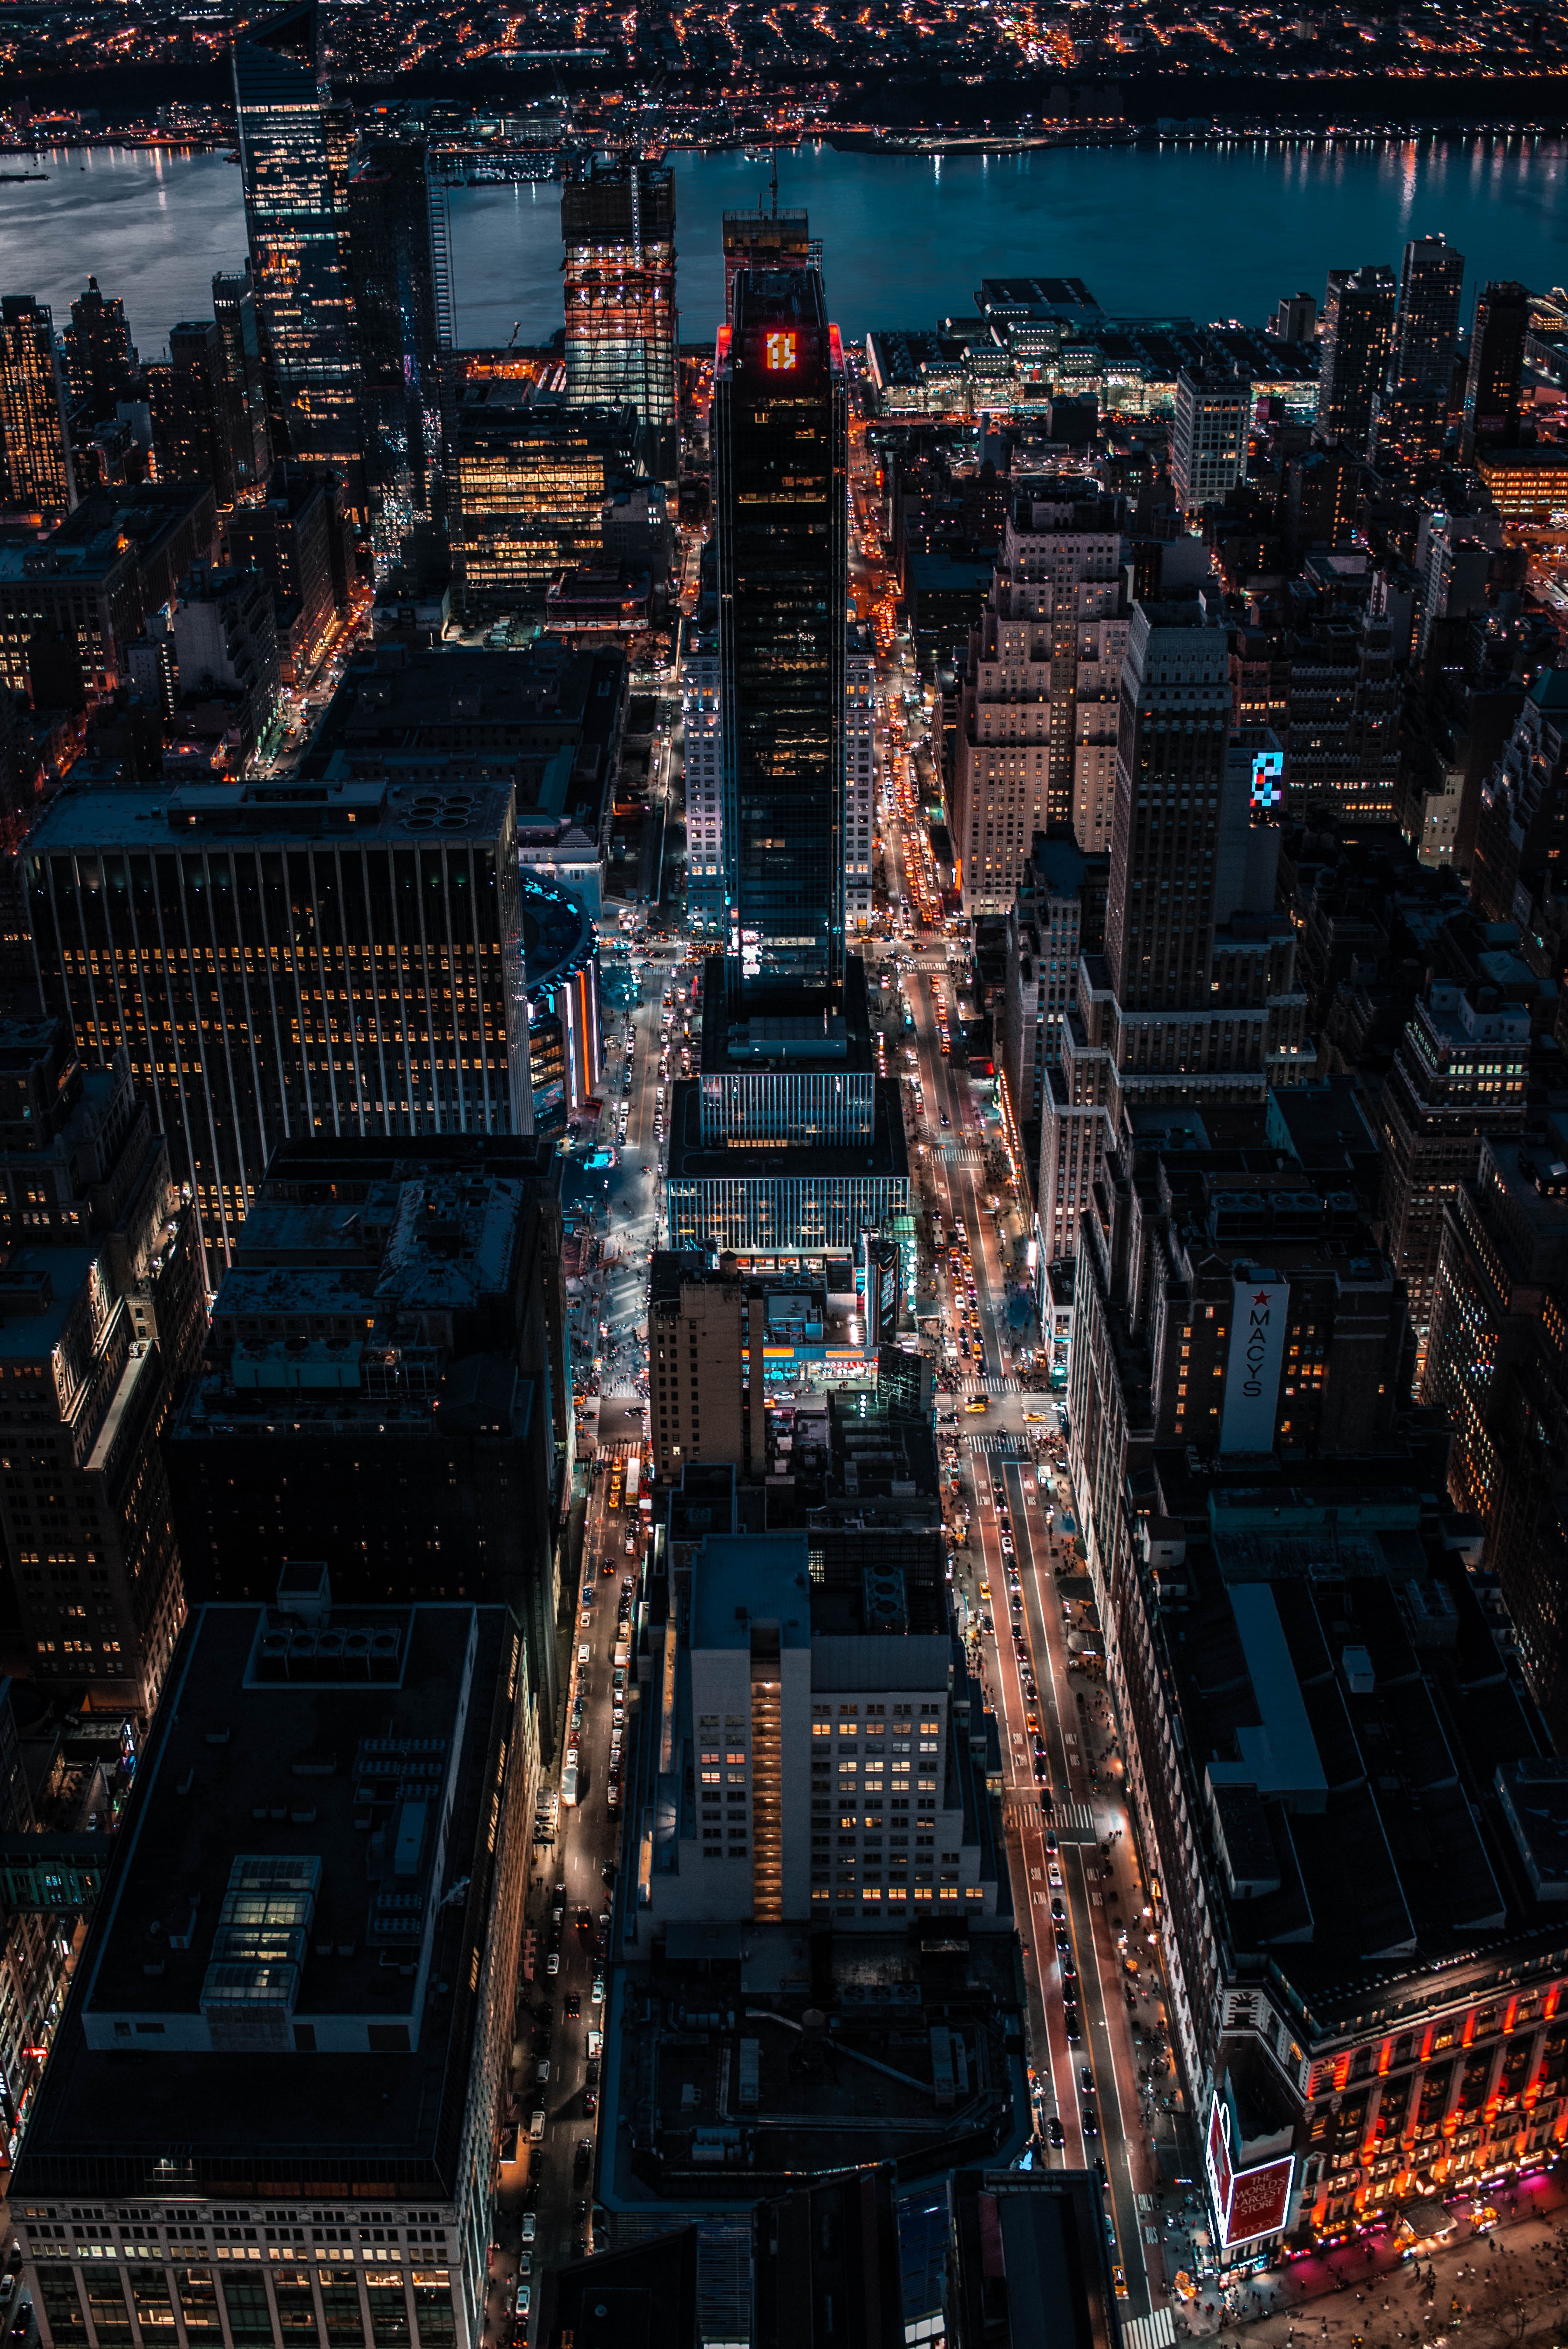 98236 download wallpaper cities, building, view from above, night city, city lights, skyscrapers, megapolis, megalopolis screensavers and pictures for free